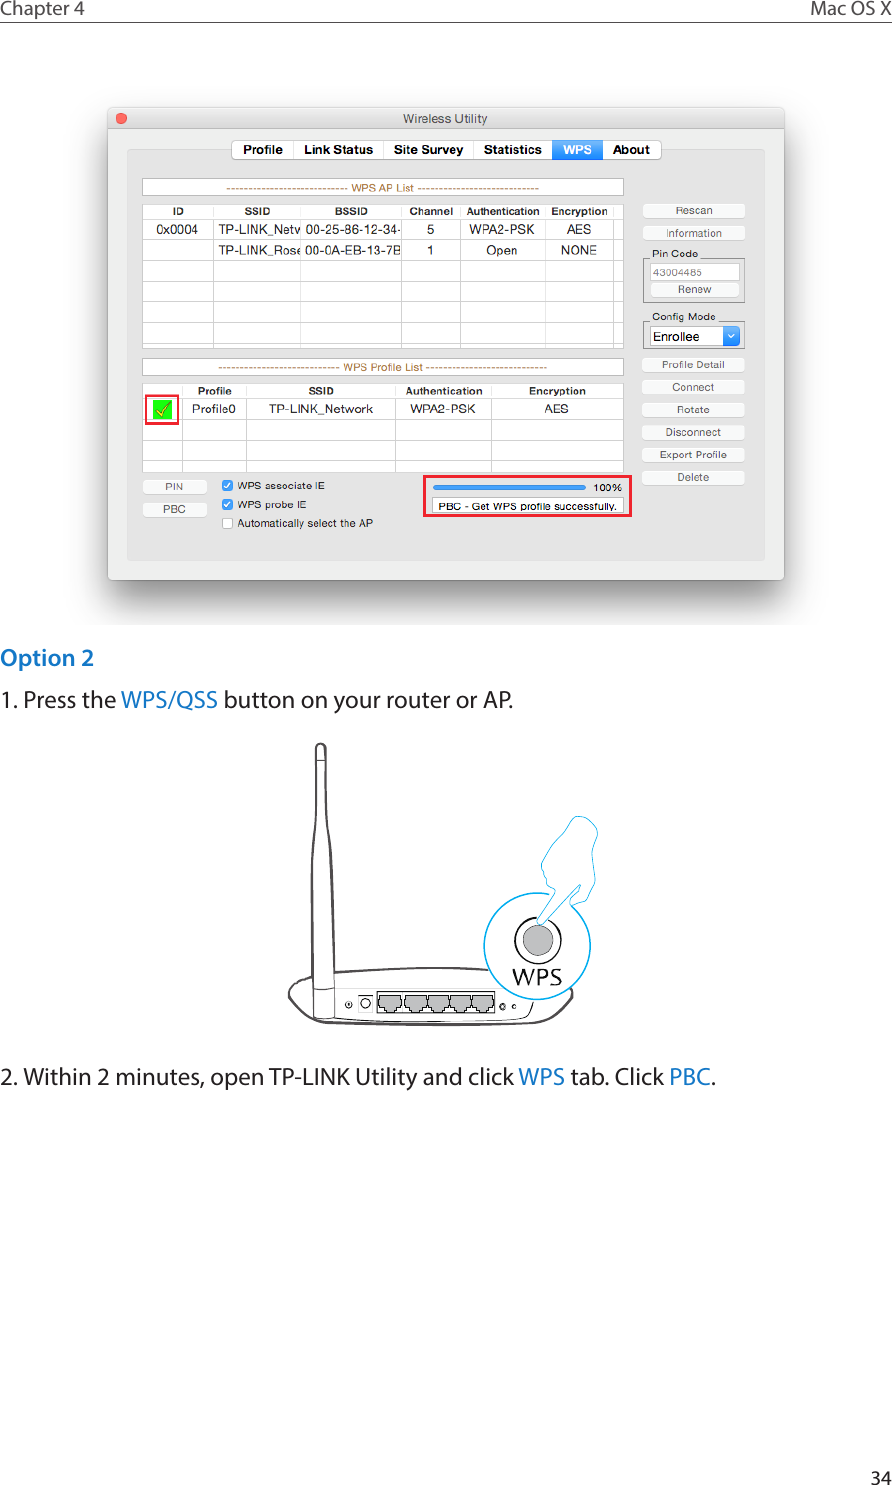 34Chapter 4 Mac OS XOption 21. Press the WPS/QSS button on your router or AP.2. Within 2 minutes, open TP-LINK Utility and click WPS tab. Click PBC. 